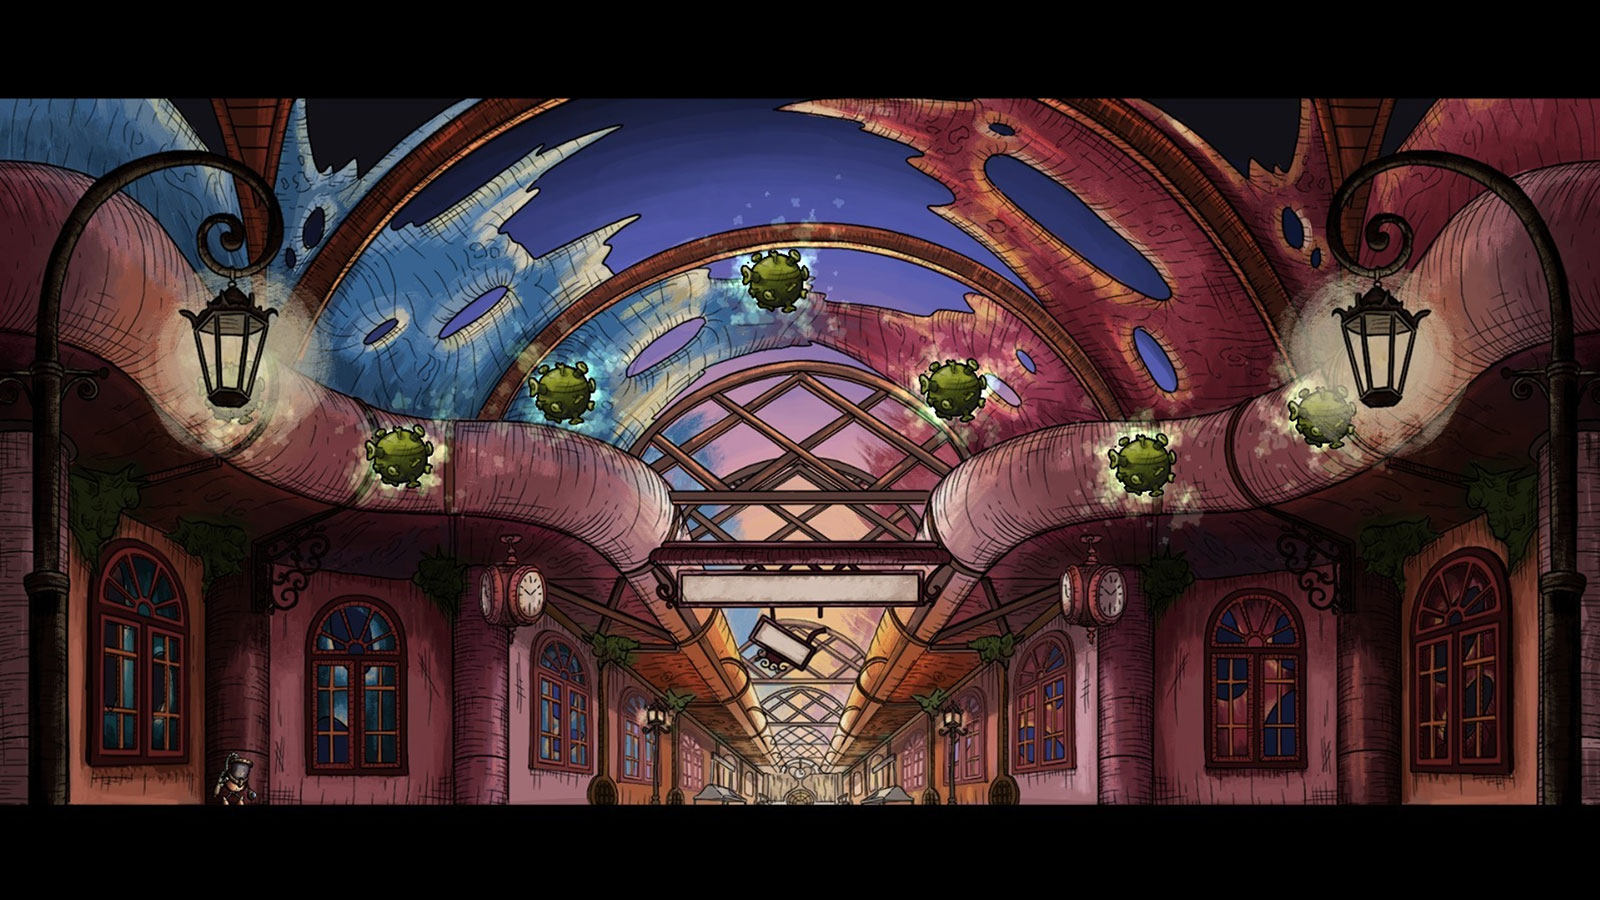 Cinematic cutscene of the player arriving in a massive hallway with an open ceiling